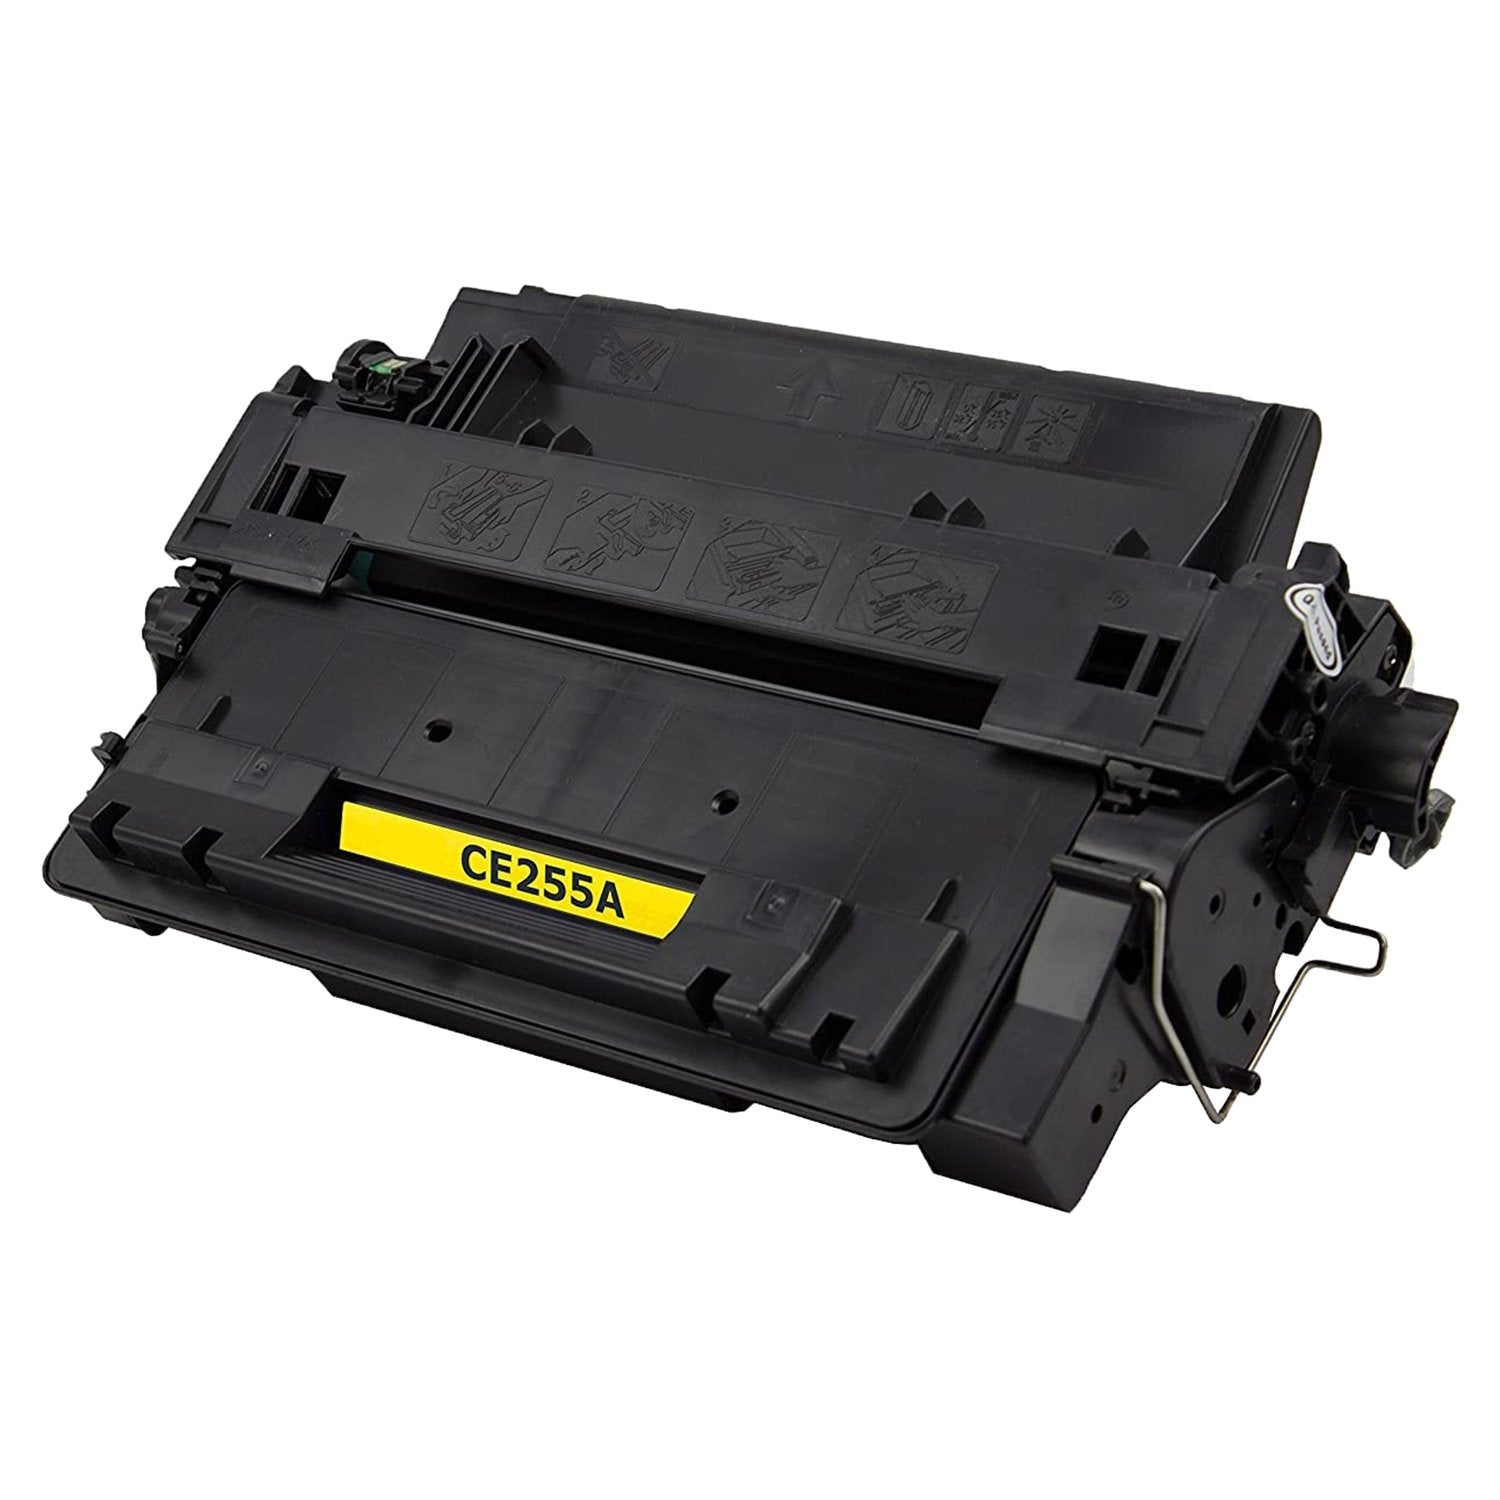 Absolute Toner Compatible CE255A HP 55A Black Toner Cartridge | Absolute Toner HP Toner Cartridges